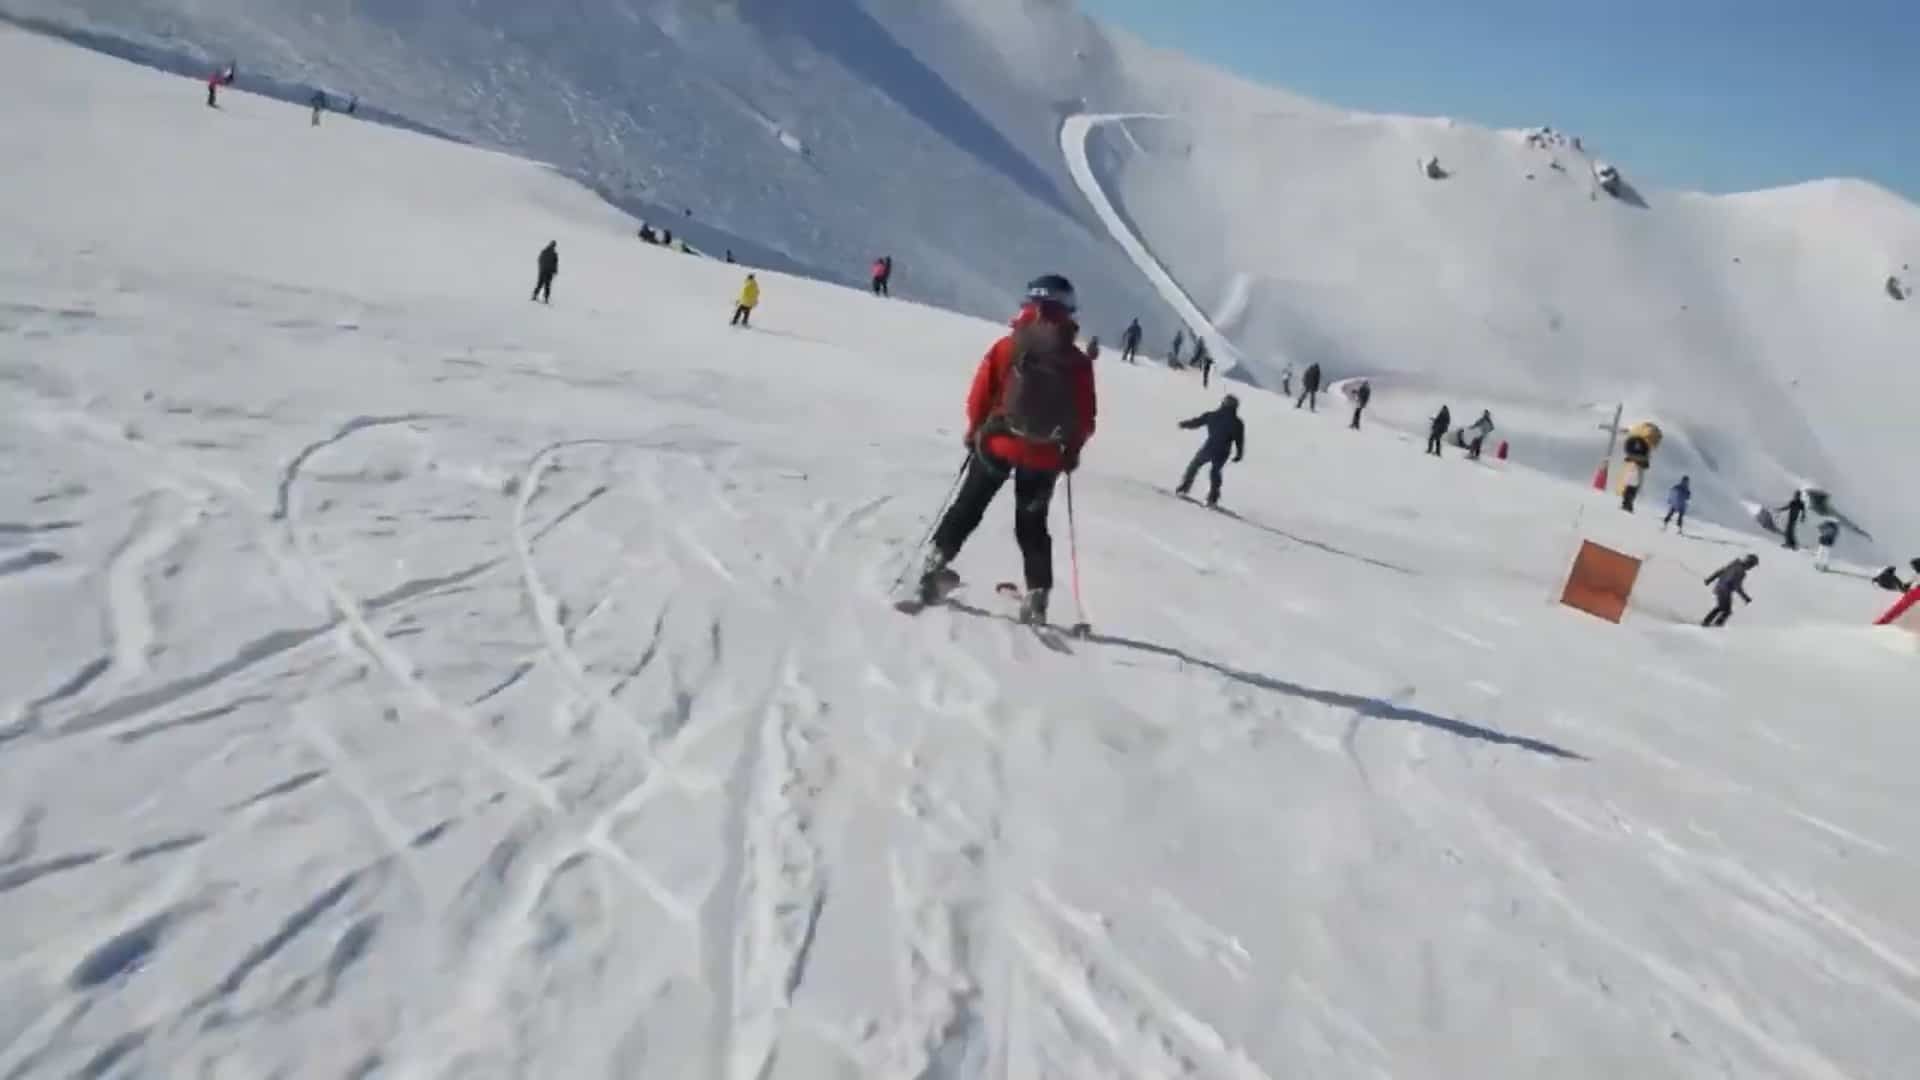 Mt Hutt Rescue: The Skiing Place